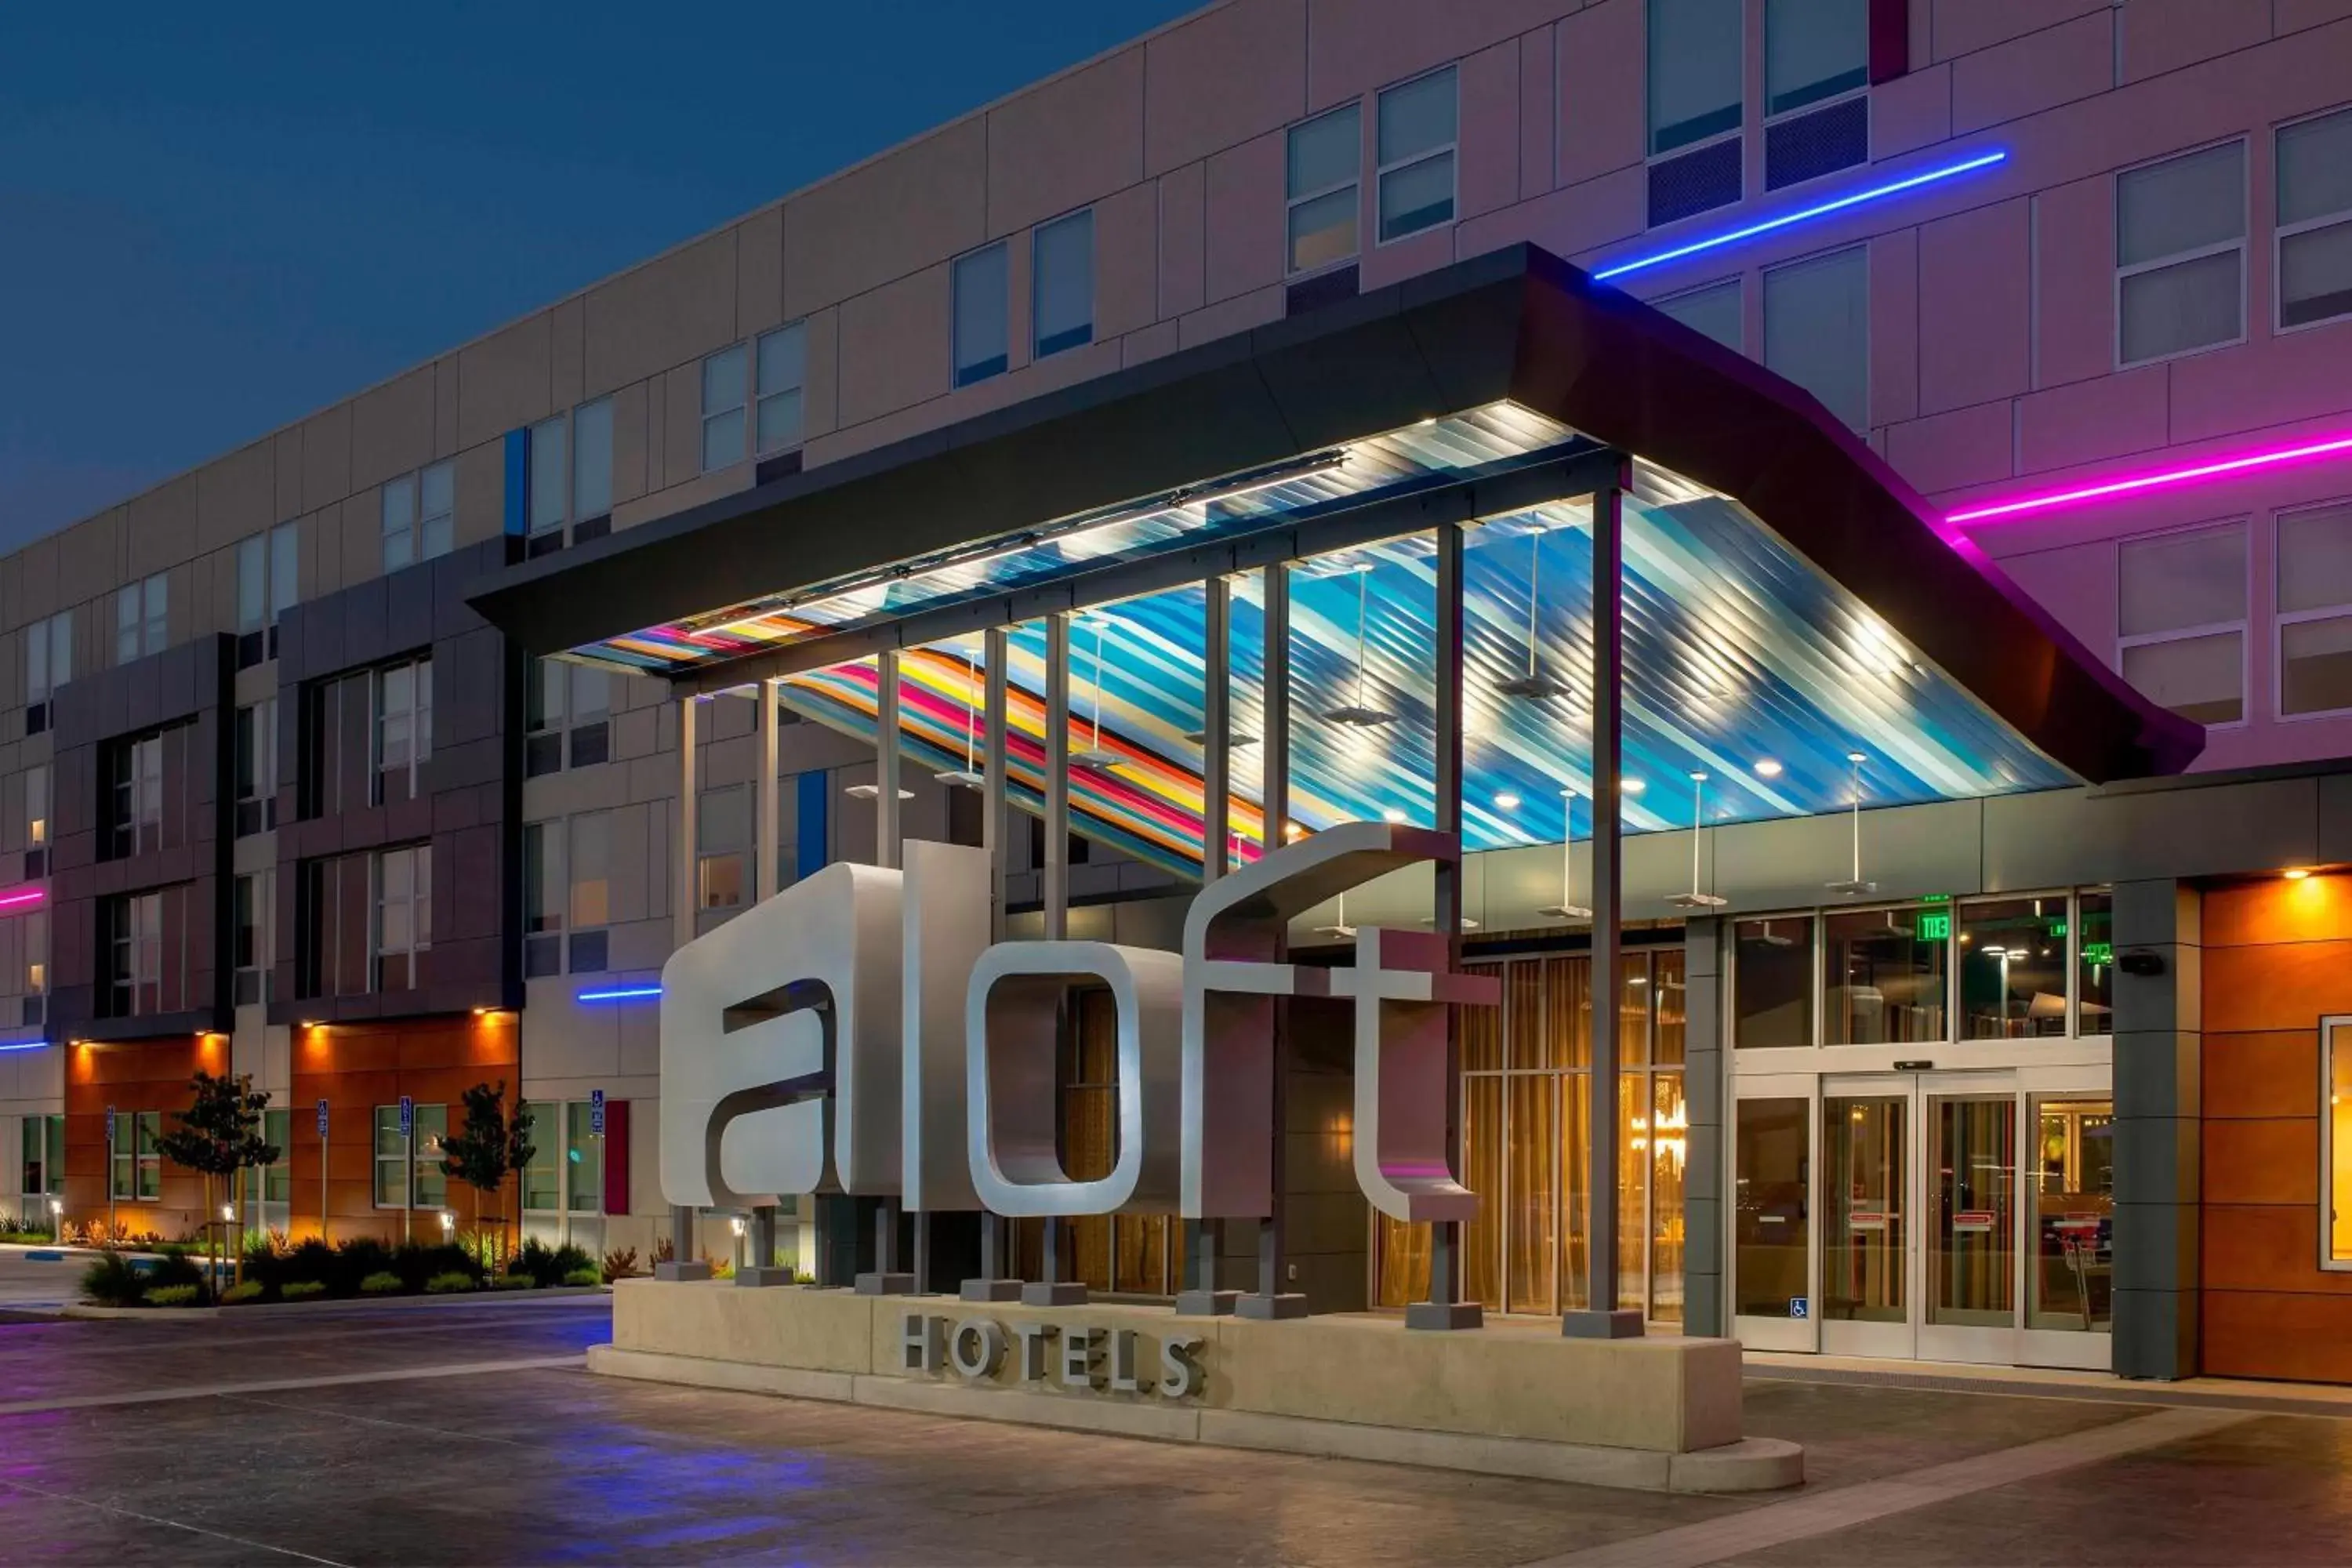 Property Building in Aloft Knoxville West